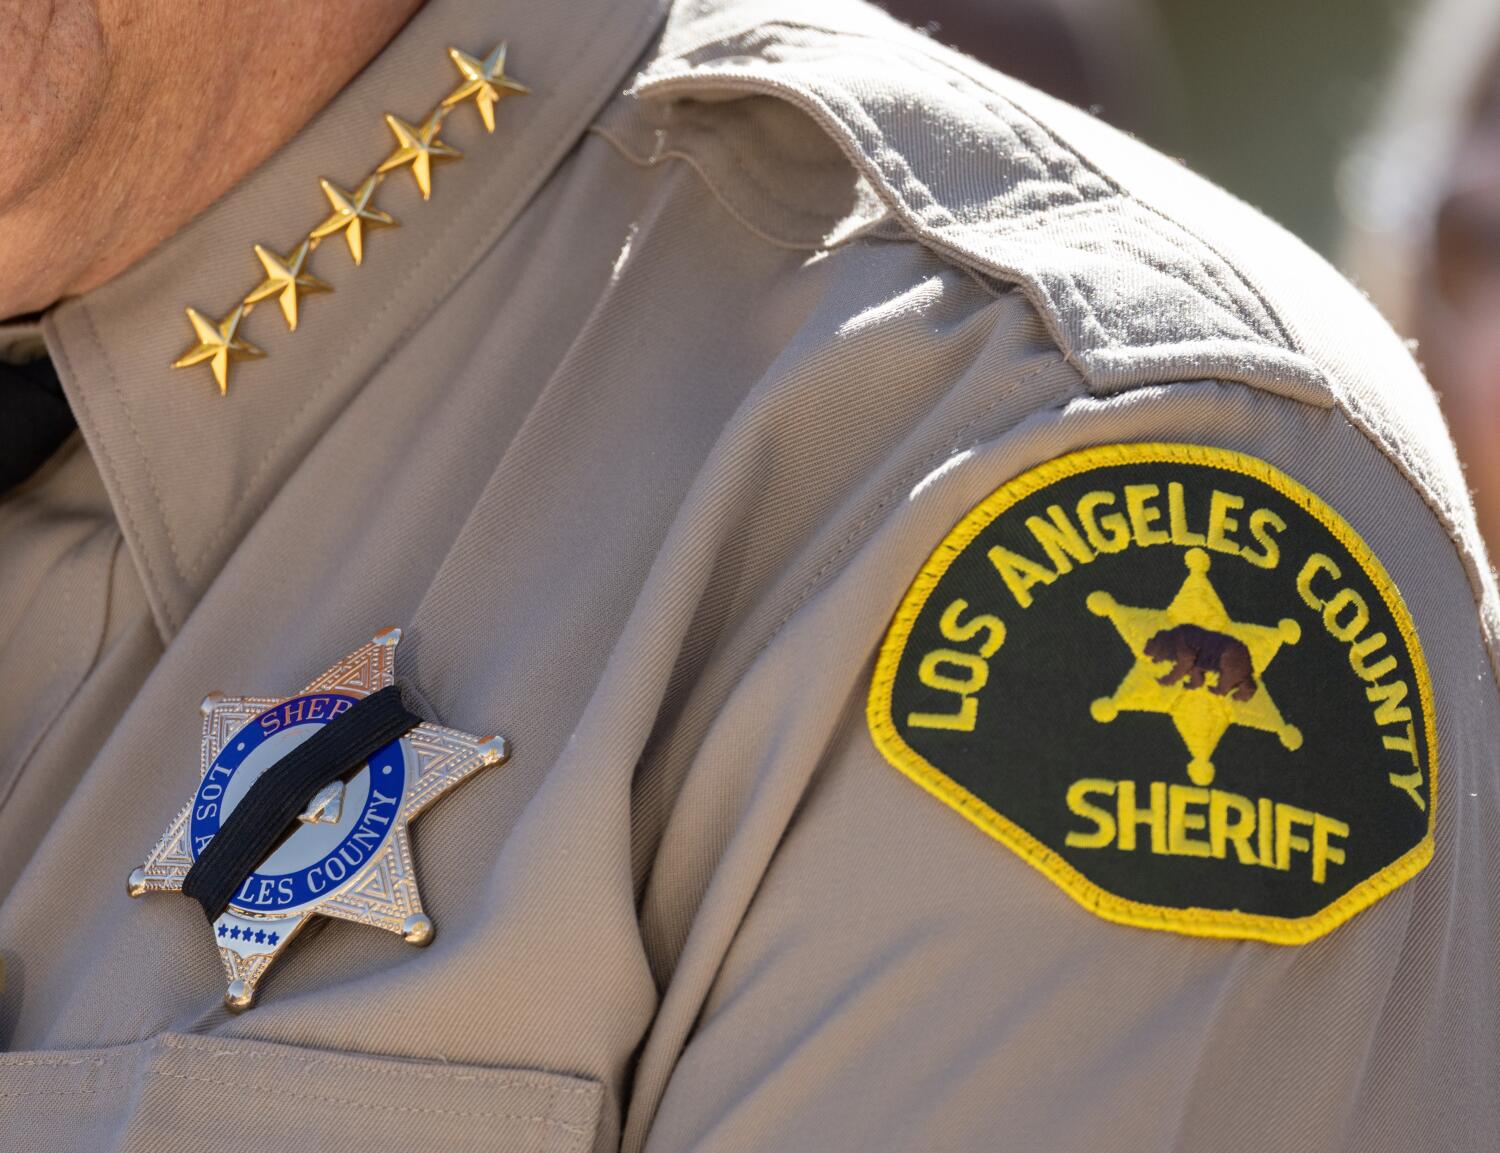 Editorial: Deputy deaths are a reminder that law enforcement can be lonely, traumatic work